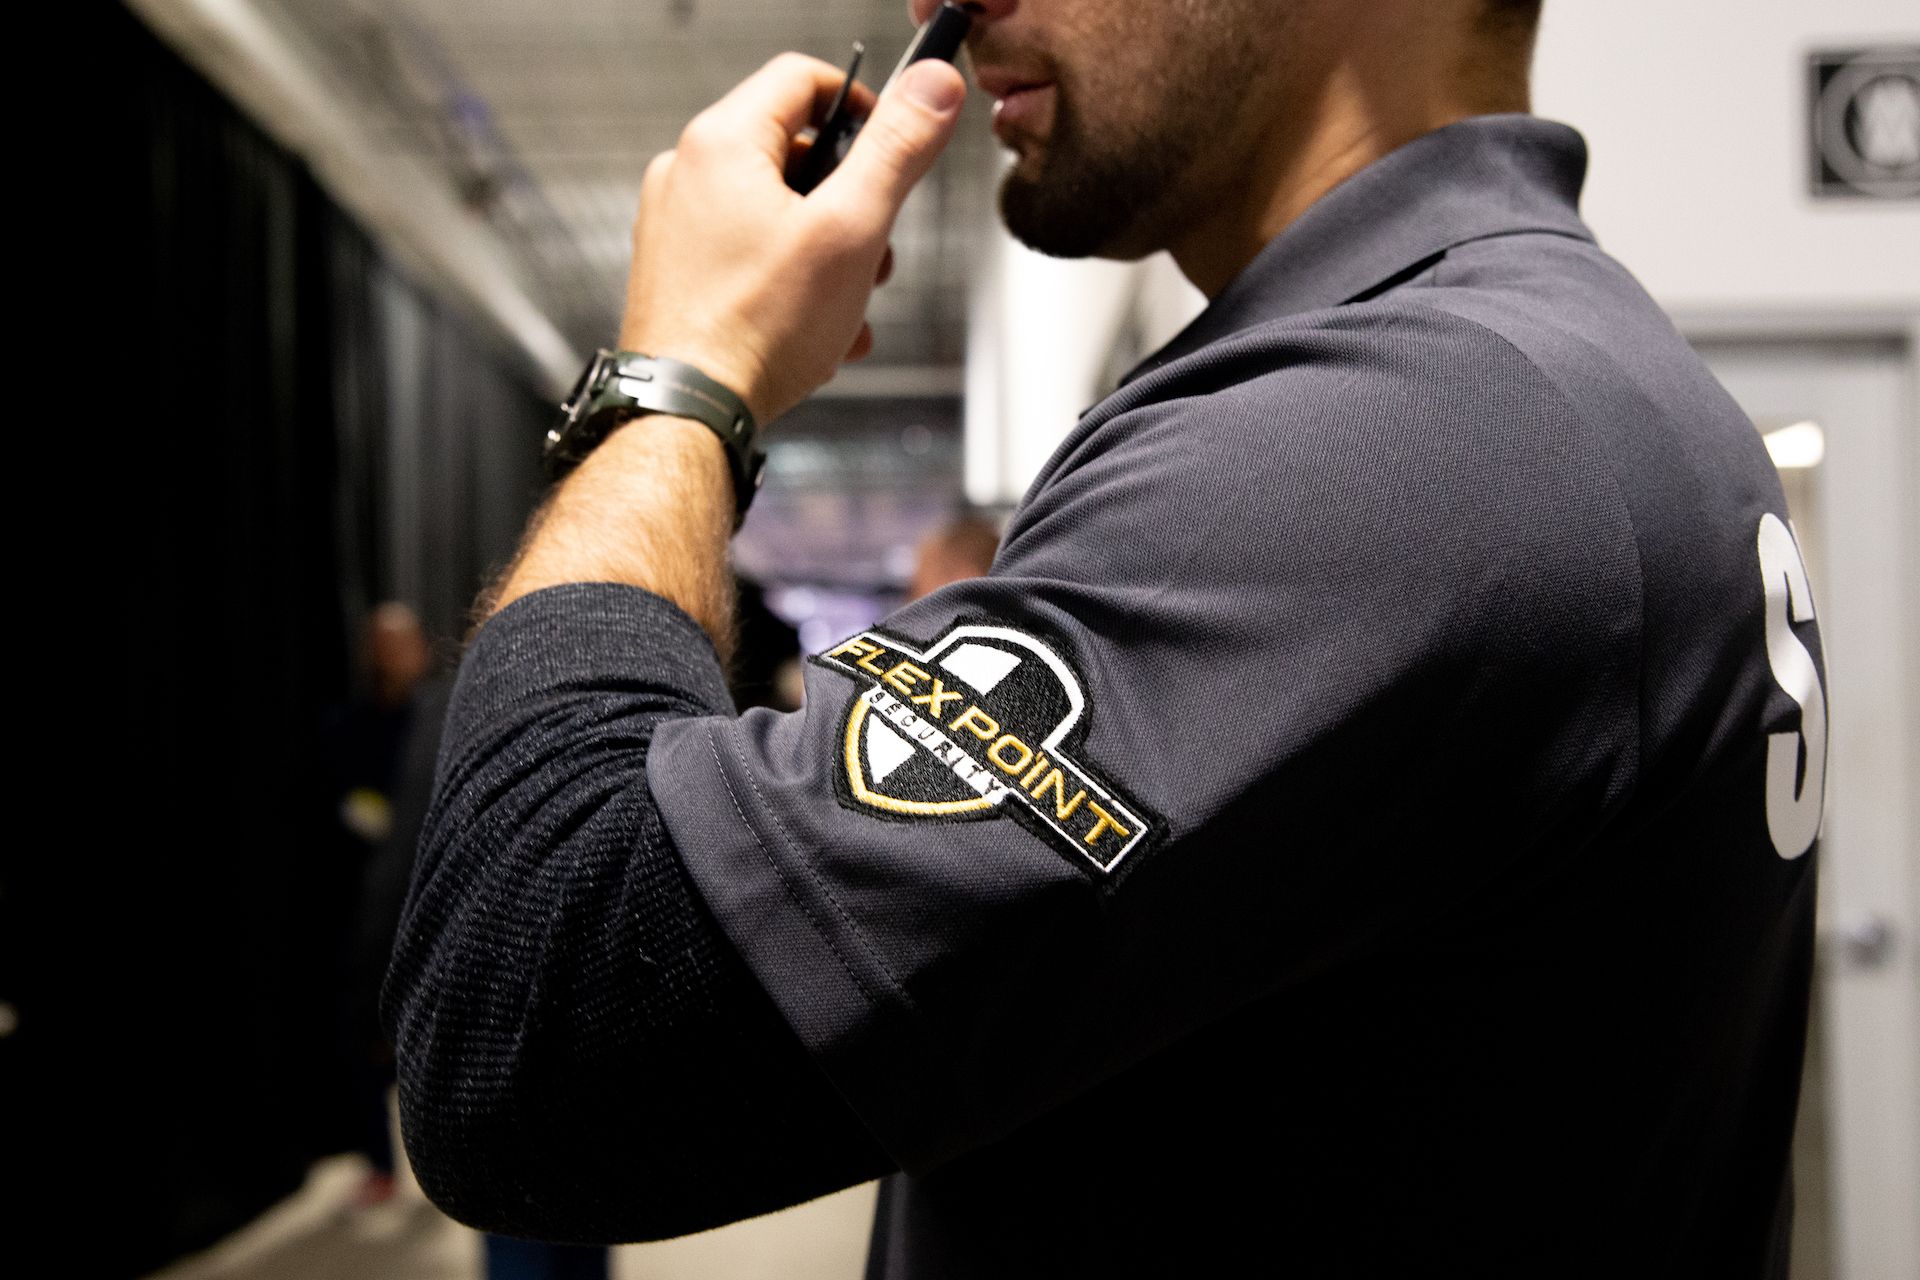 A male Flex Point Security guard at an event using a walkie talkie to communicate with other guards about a major incident